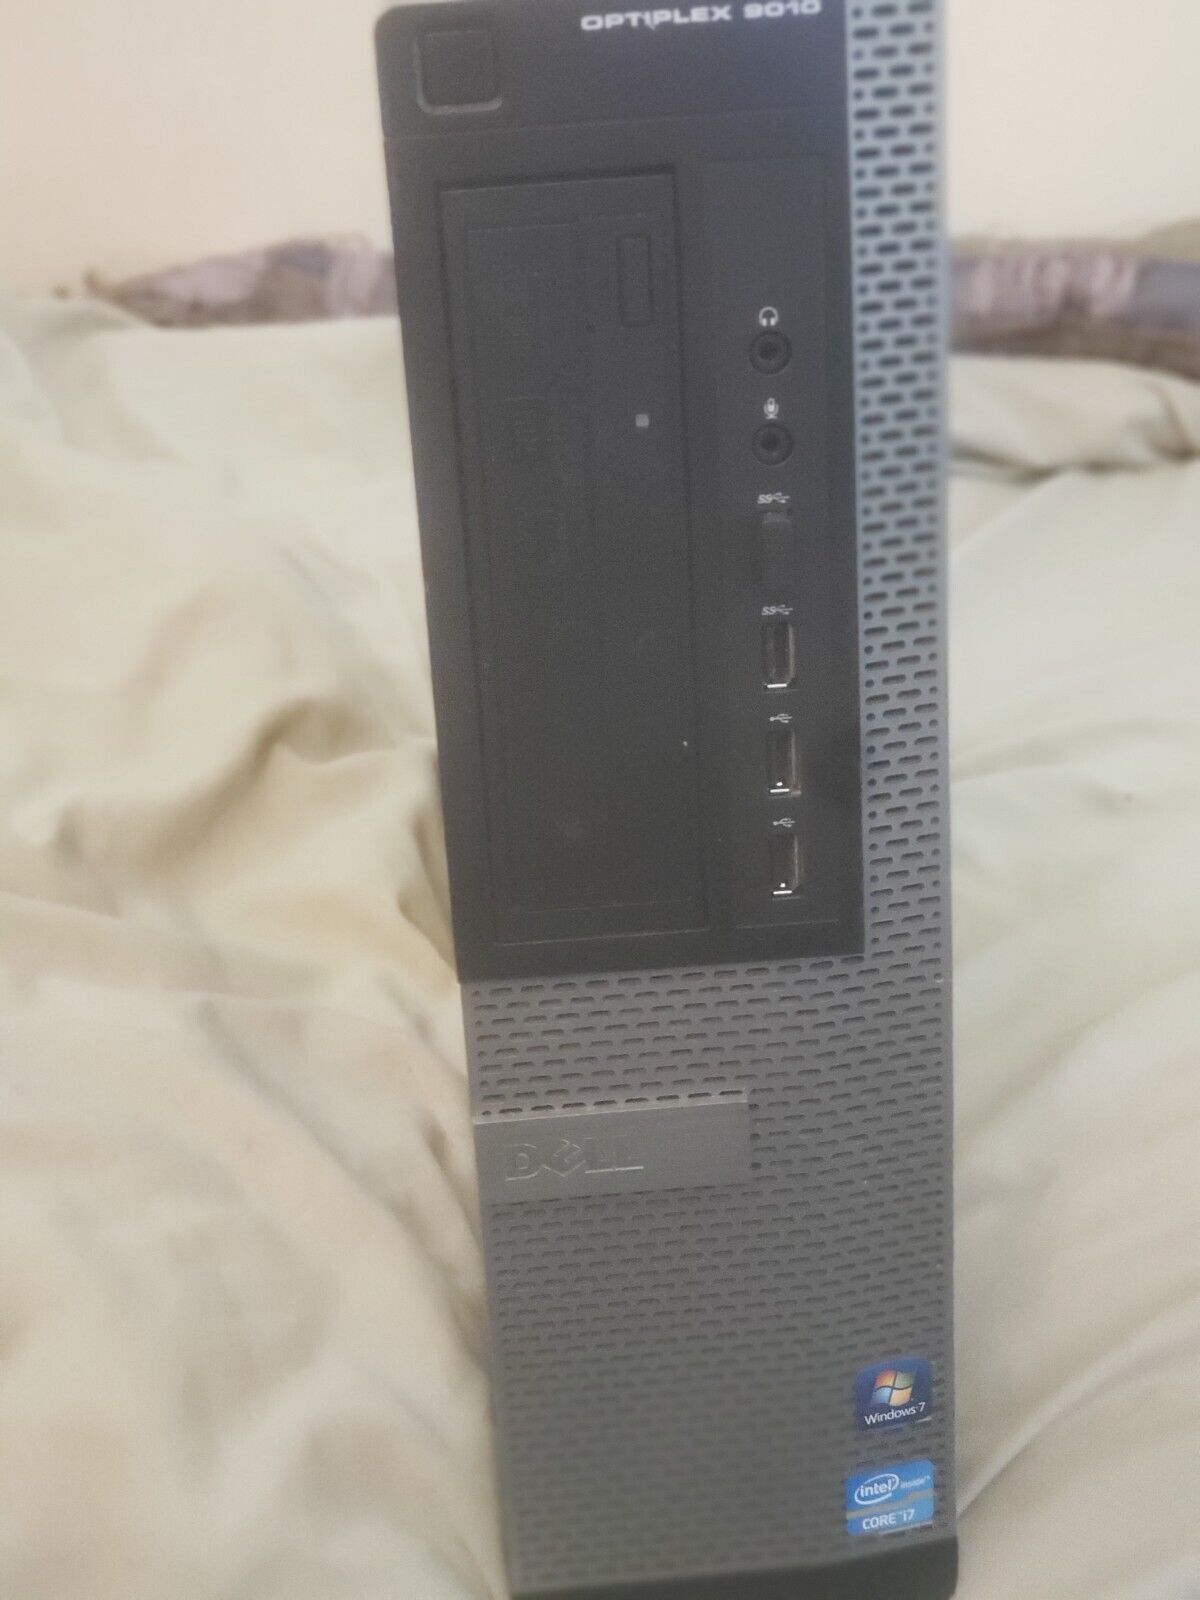 Dell Optiplex 9010 DT I7 3770 3.40 to 3.9GHz 32GB RAM 250 SSD+1TBHDD win 10 home